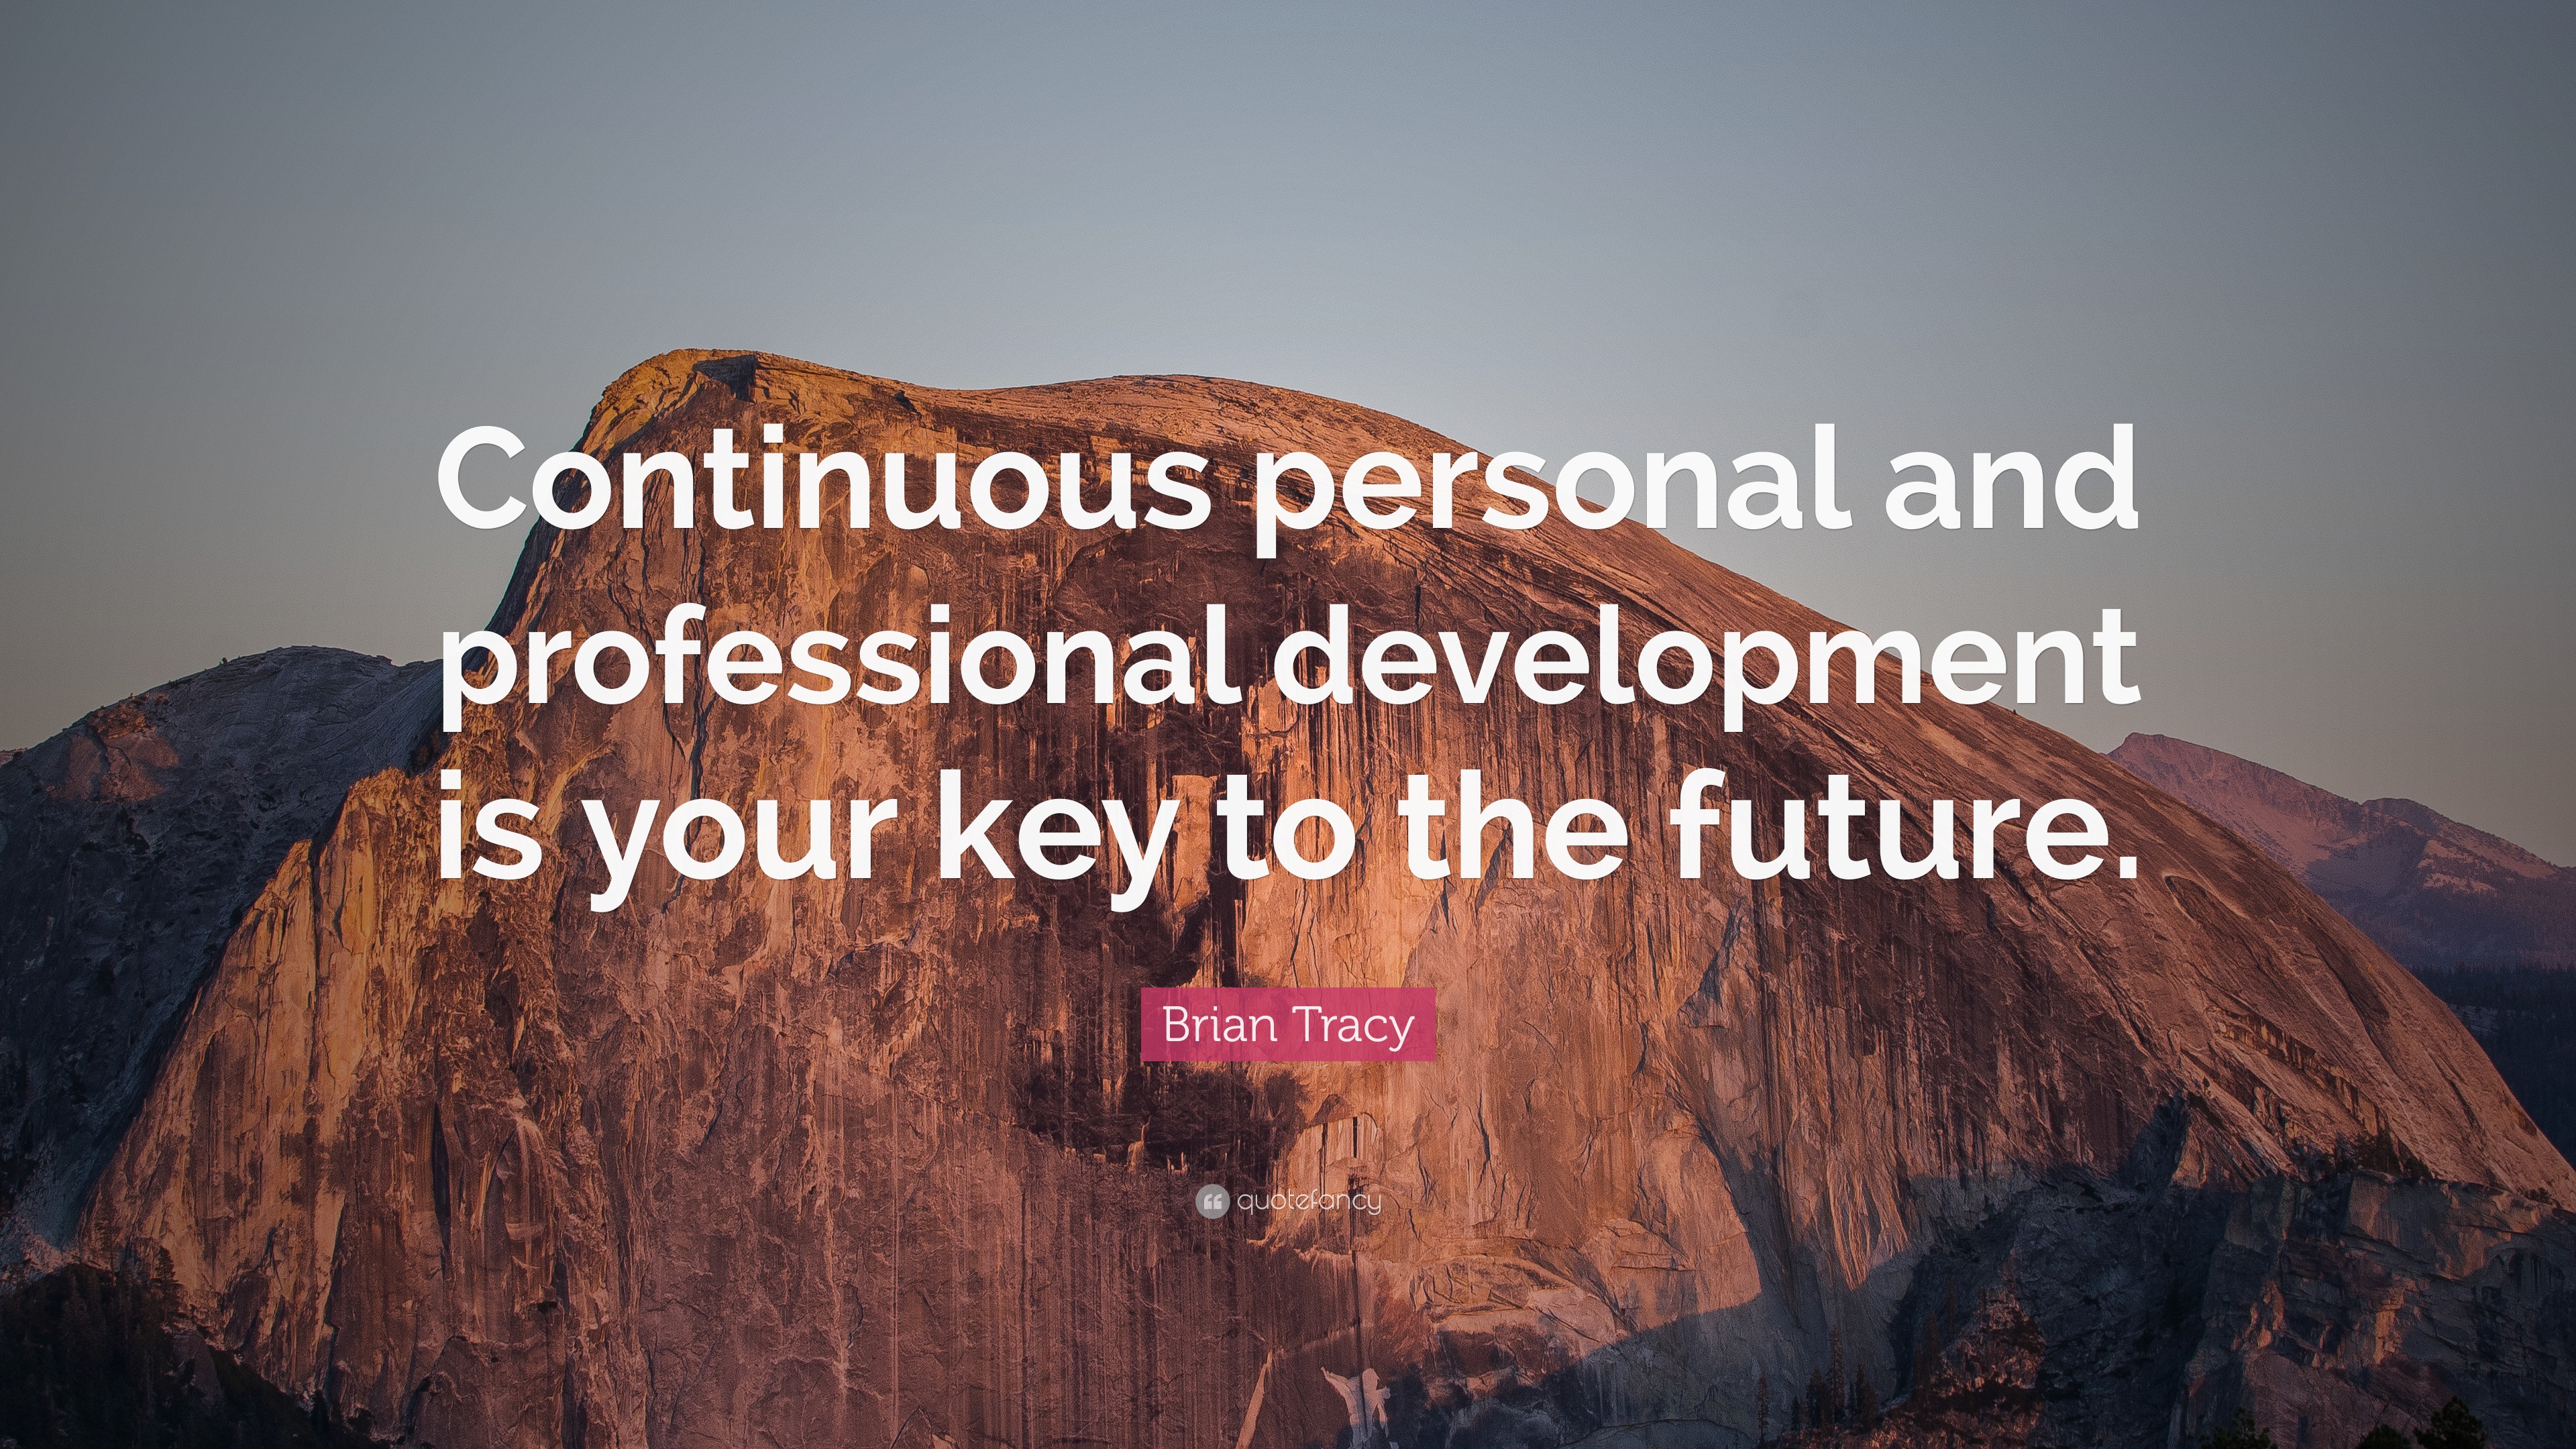 Brian Tracy Quote “Continuous personal and professional